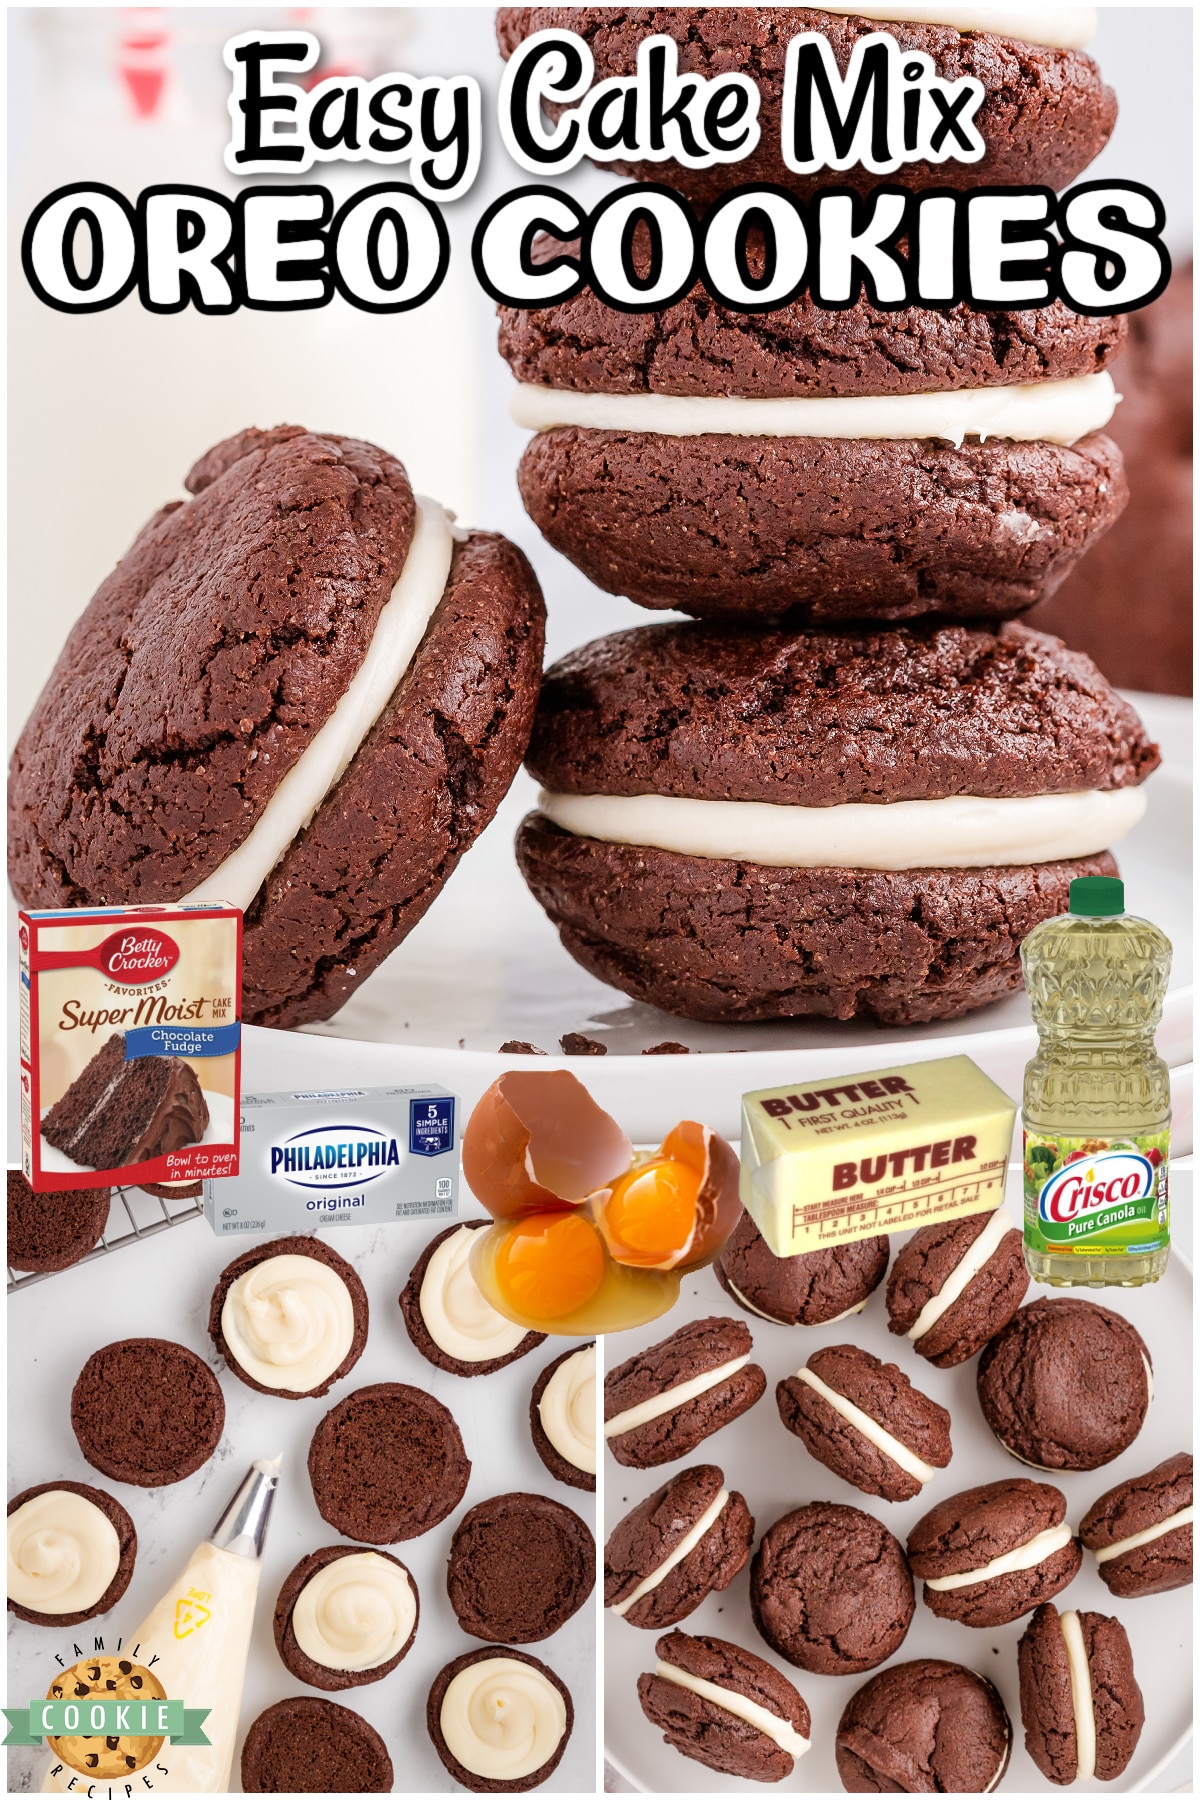 Simple recipe for Easy Homemade Oreo Cookies made with a chocolate cake mix! Soft, perfectly sweet chocolate sandwich cookies that everyone goes crazy over!